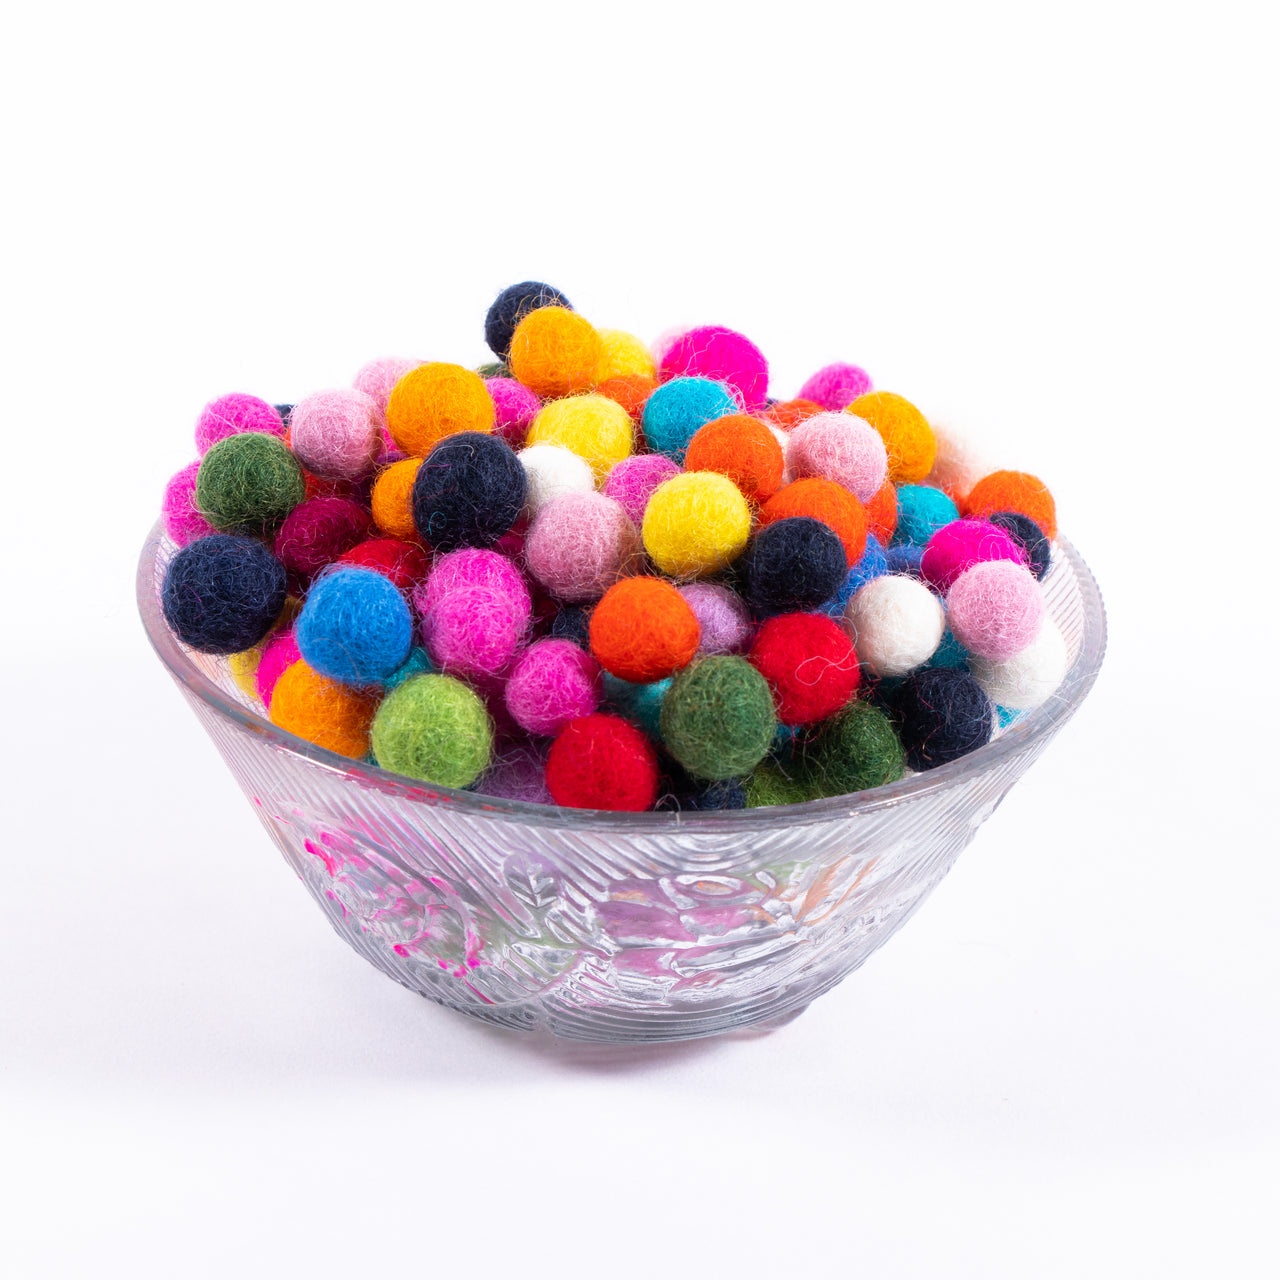 Luckforest 60 Pcs Natural Wool Felt Balls Pom Poms for Crafts, Garland, Felting, Baby Mobile and Decor 0.8 inch Nepalese 100% New Zealand Wool